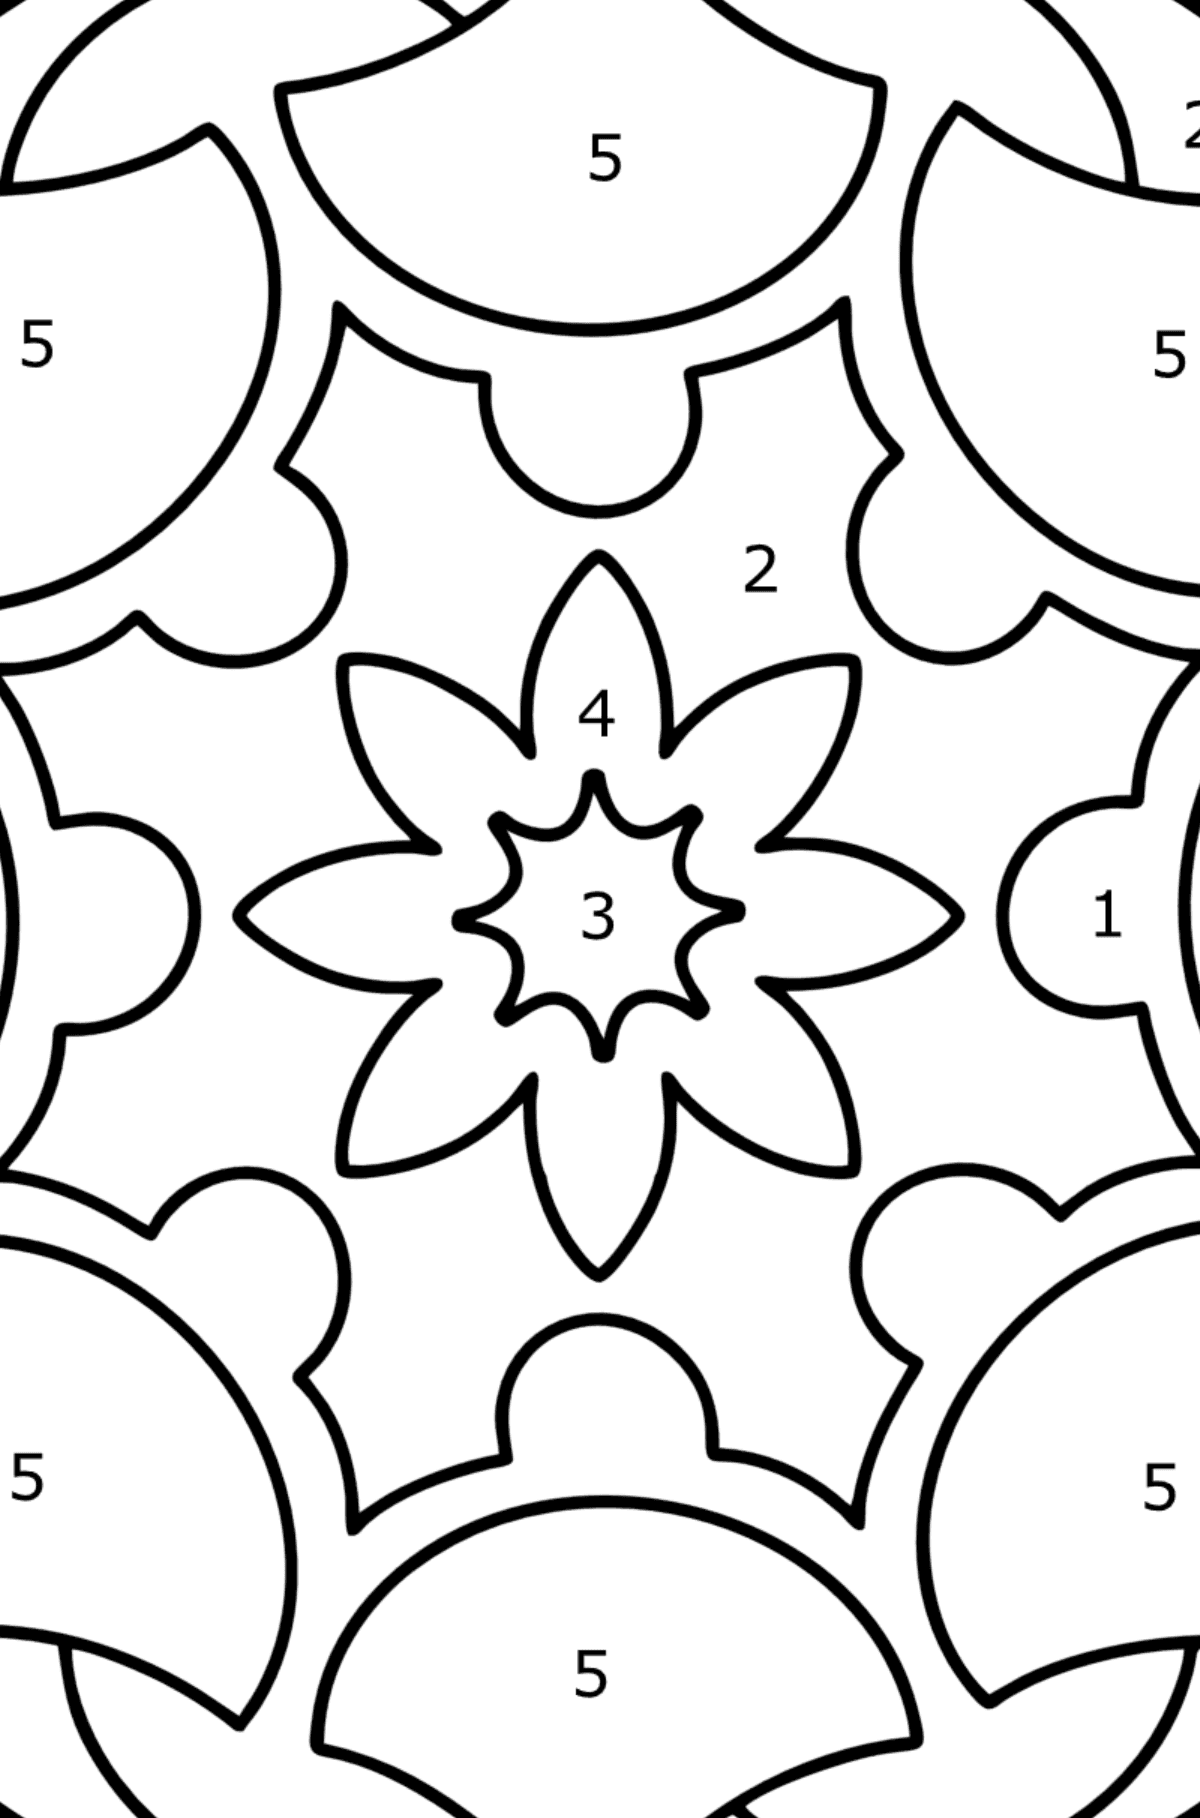 Mandala coloring page - 13 elements - Coloring by Numbers for Kids